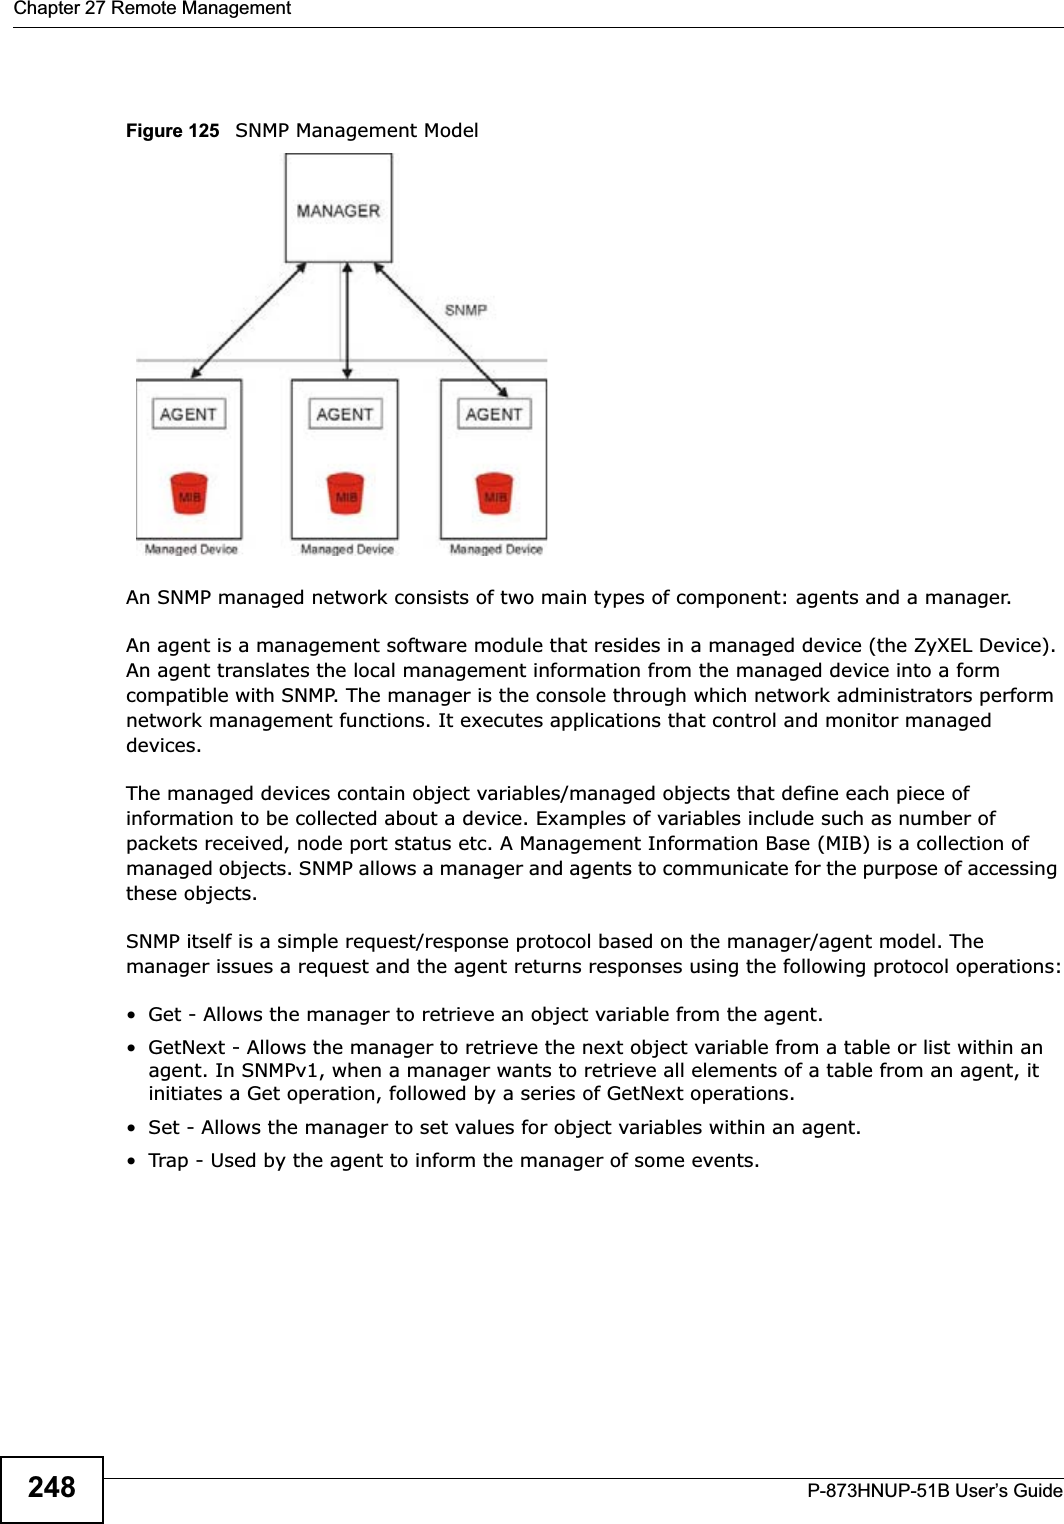 Chapter 27 Remote ManagementP-873HNUP-51B User’s Guide248Figure 125   SNMP Management ModelAn SNMP managed network consists of two main types of component: agents and a manager. An agent is a management software module that resides in a managed device (the ZyXEL Device). An agent translates the local management information from the managed device into a form compatible with SNMP. The manager is the console through which network administrators perform network management functions. It executes applications that control and monitor managed devices. The managed devices contain object variables/managed objects that define each piece of information to be collected about a device. Examples of variables include such as number of packets received, node port status etc. A Management Information Base (MIB) is a collection of managed objects. SNMP allows a manager and agents to communicate for the purpose of accessing these objects.SNMP itself is a simple request/response protocol based on the manager/agent model. The manager issues a request and the agent returns responses using the following protocol operations:• Get - Allows the manager to retrieve an object variable from the agent. • GetNext - Allows the manager to retrieve the next object variable from a table or list within an agent. In SNMPv1, when a manager wants to retrieve all elements of a table from an agent, it initiates a Get operation, followed by a series of GetNext operations. • Set - Allows the manager to set values for object variables within an agent. • Trap - Used by the agent to inform the manager of some events.